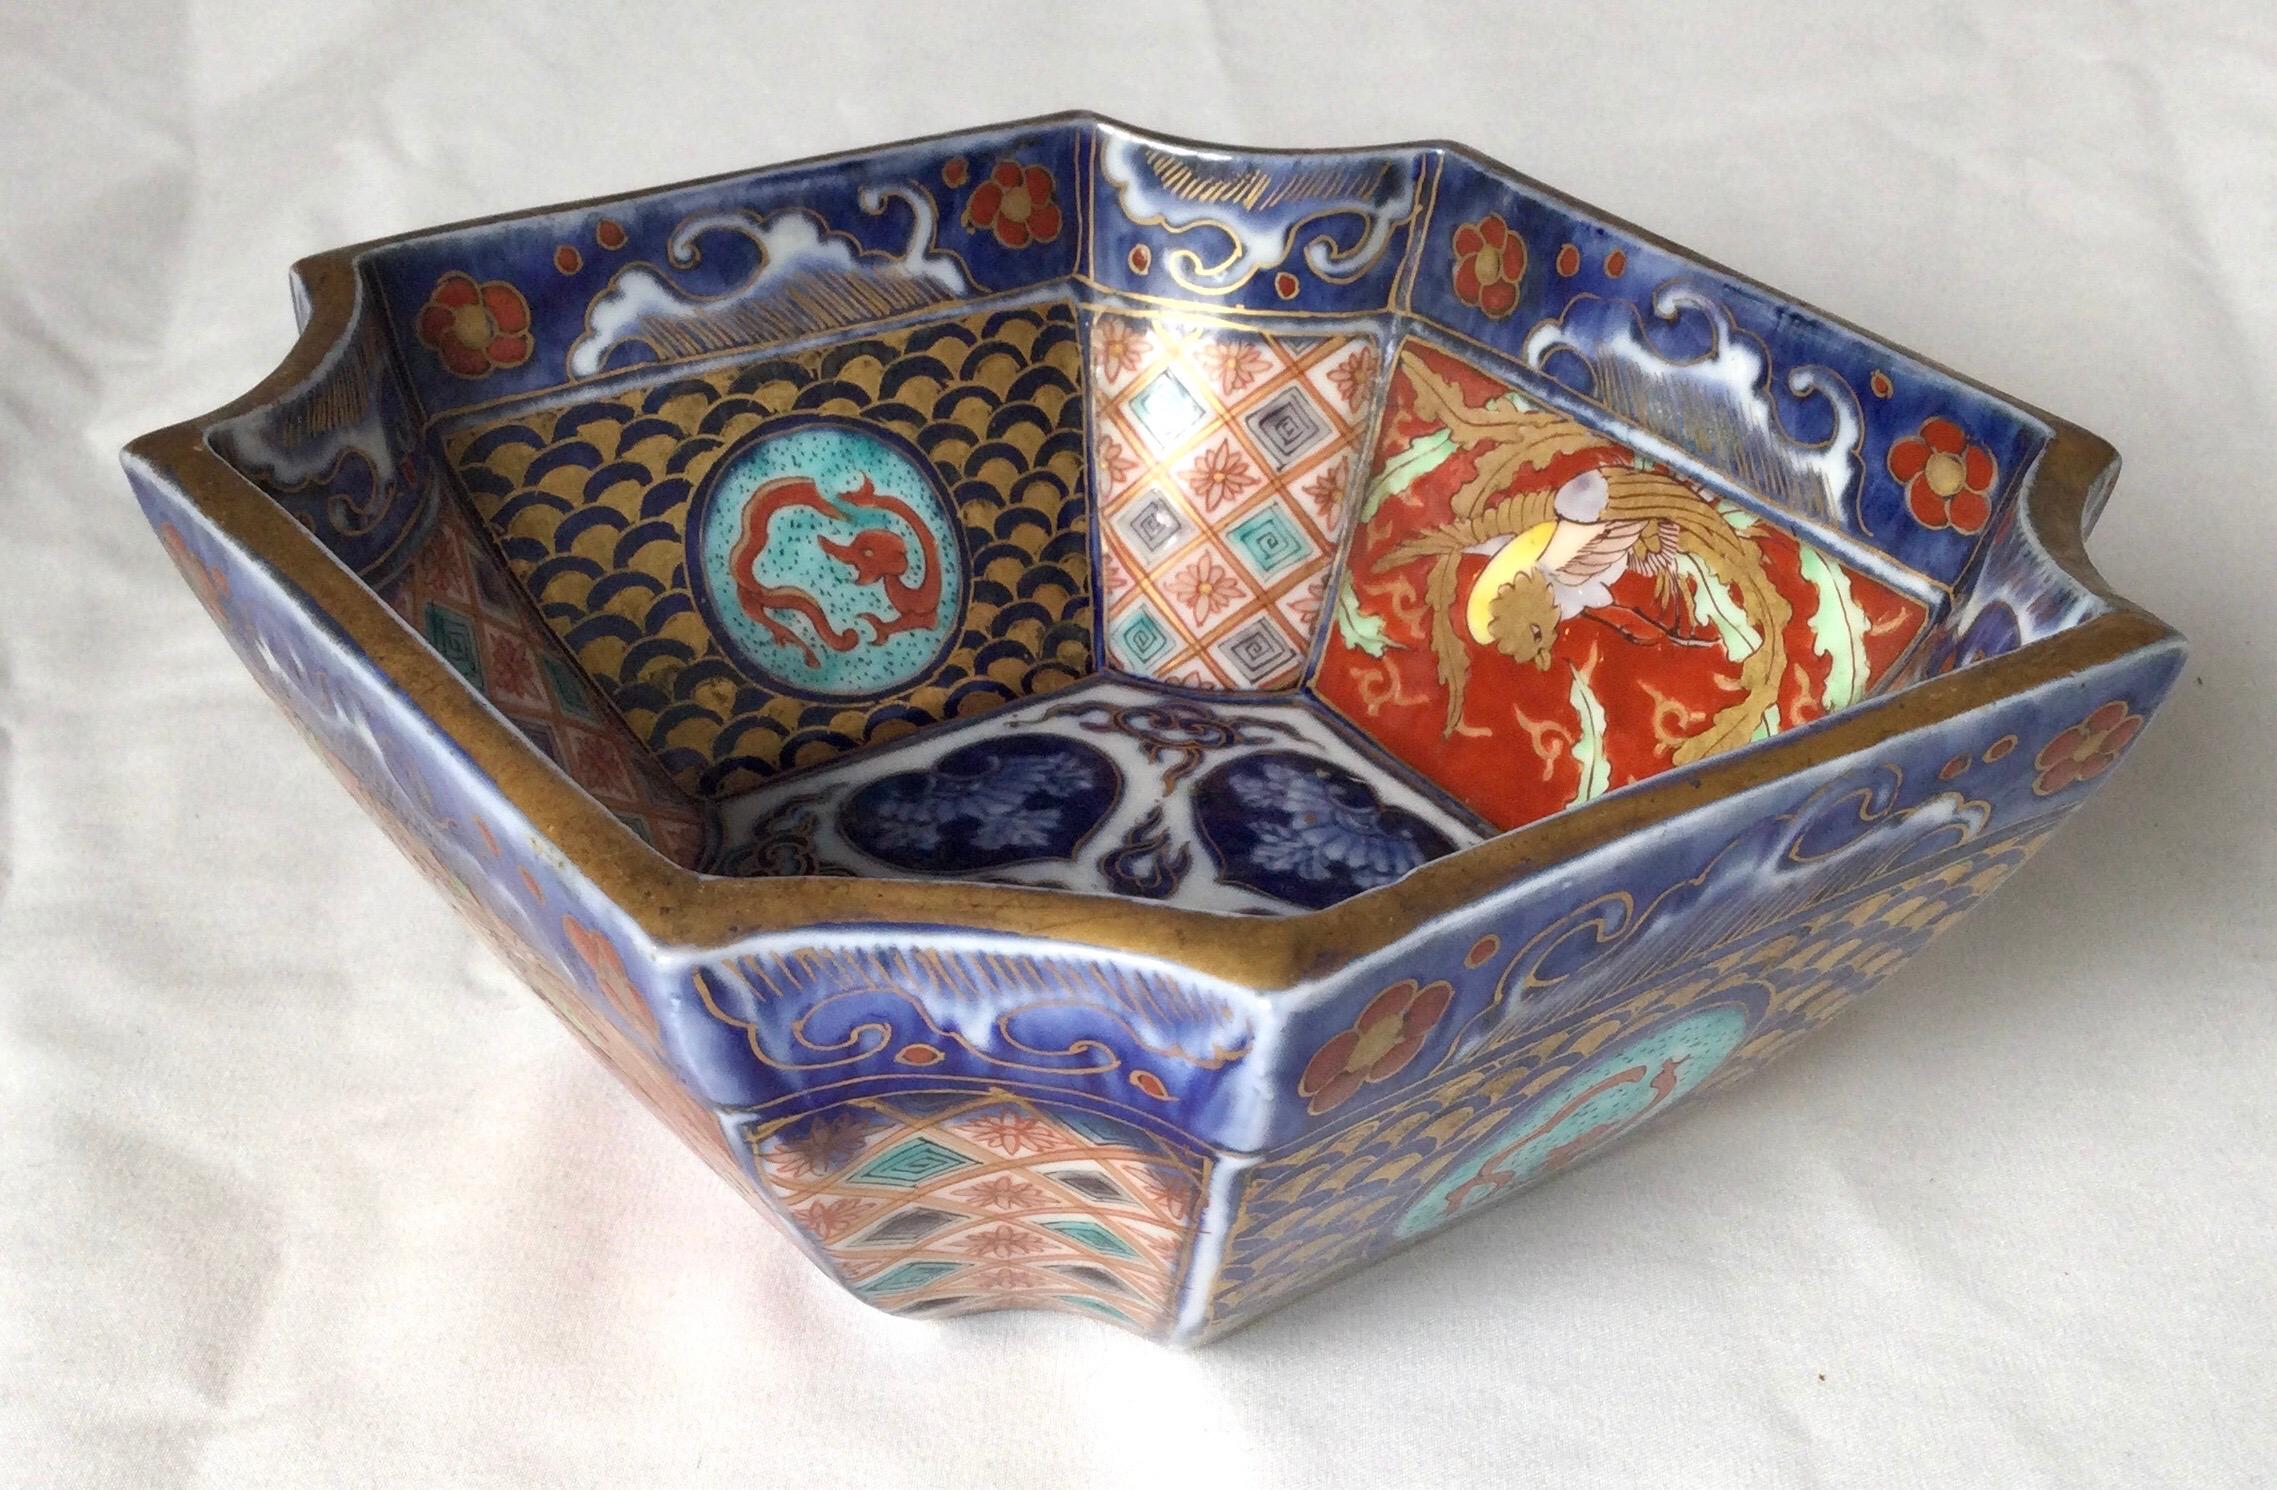 A beautifully painted Imari bowl in classic iron red and cobalt blue on white porcelain background with gilt highlights all over. 6.25 inches by 6.25 inches.